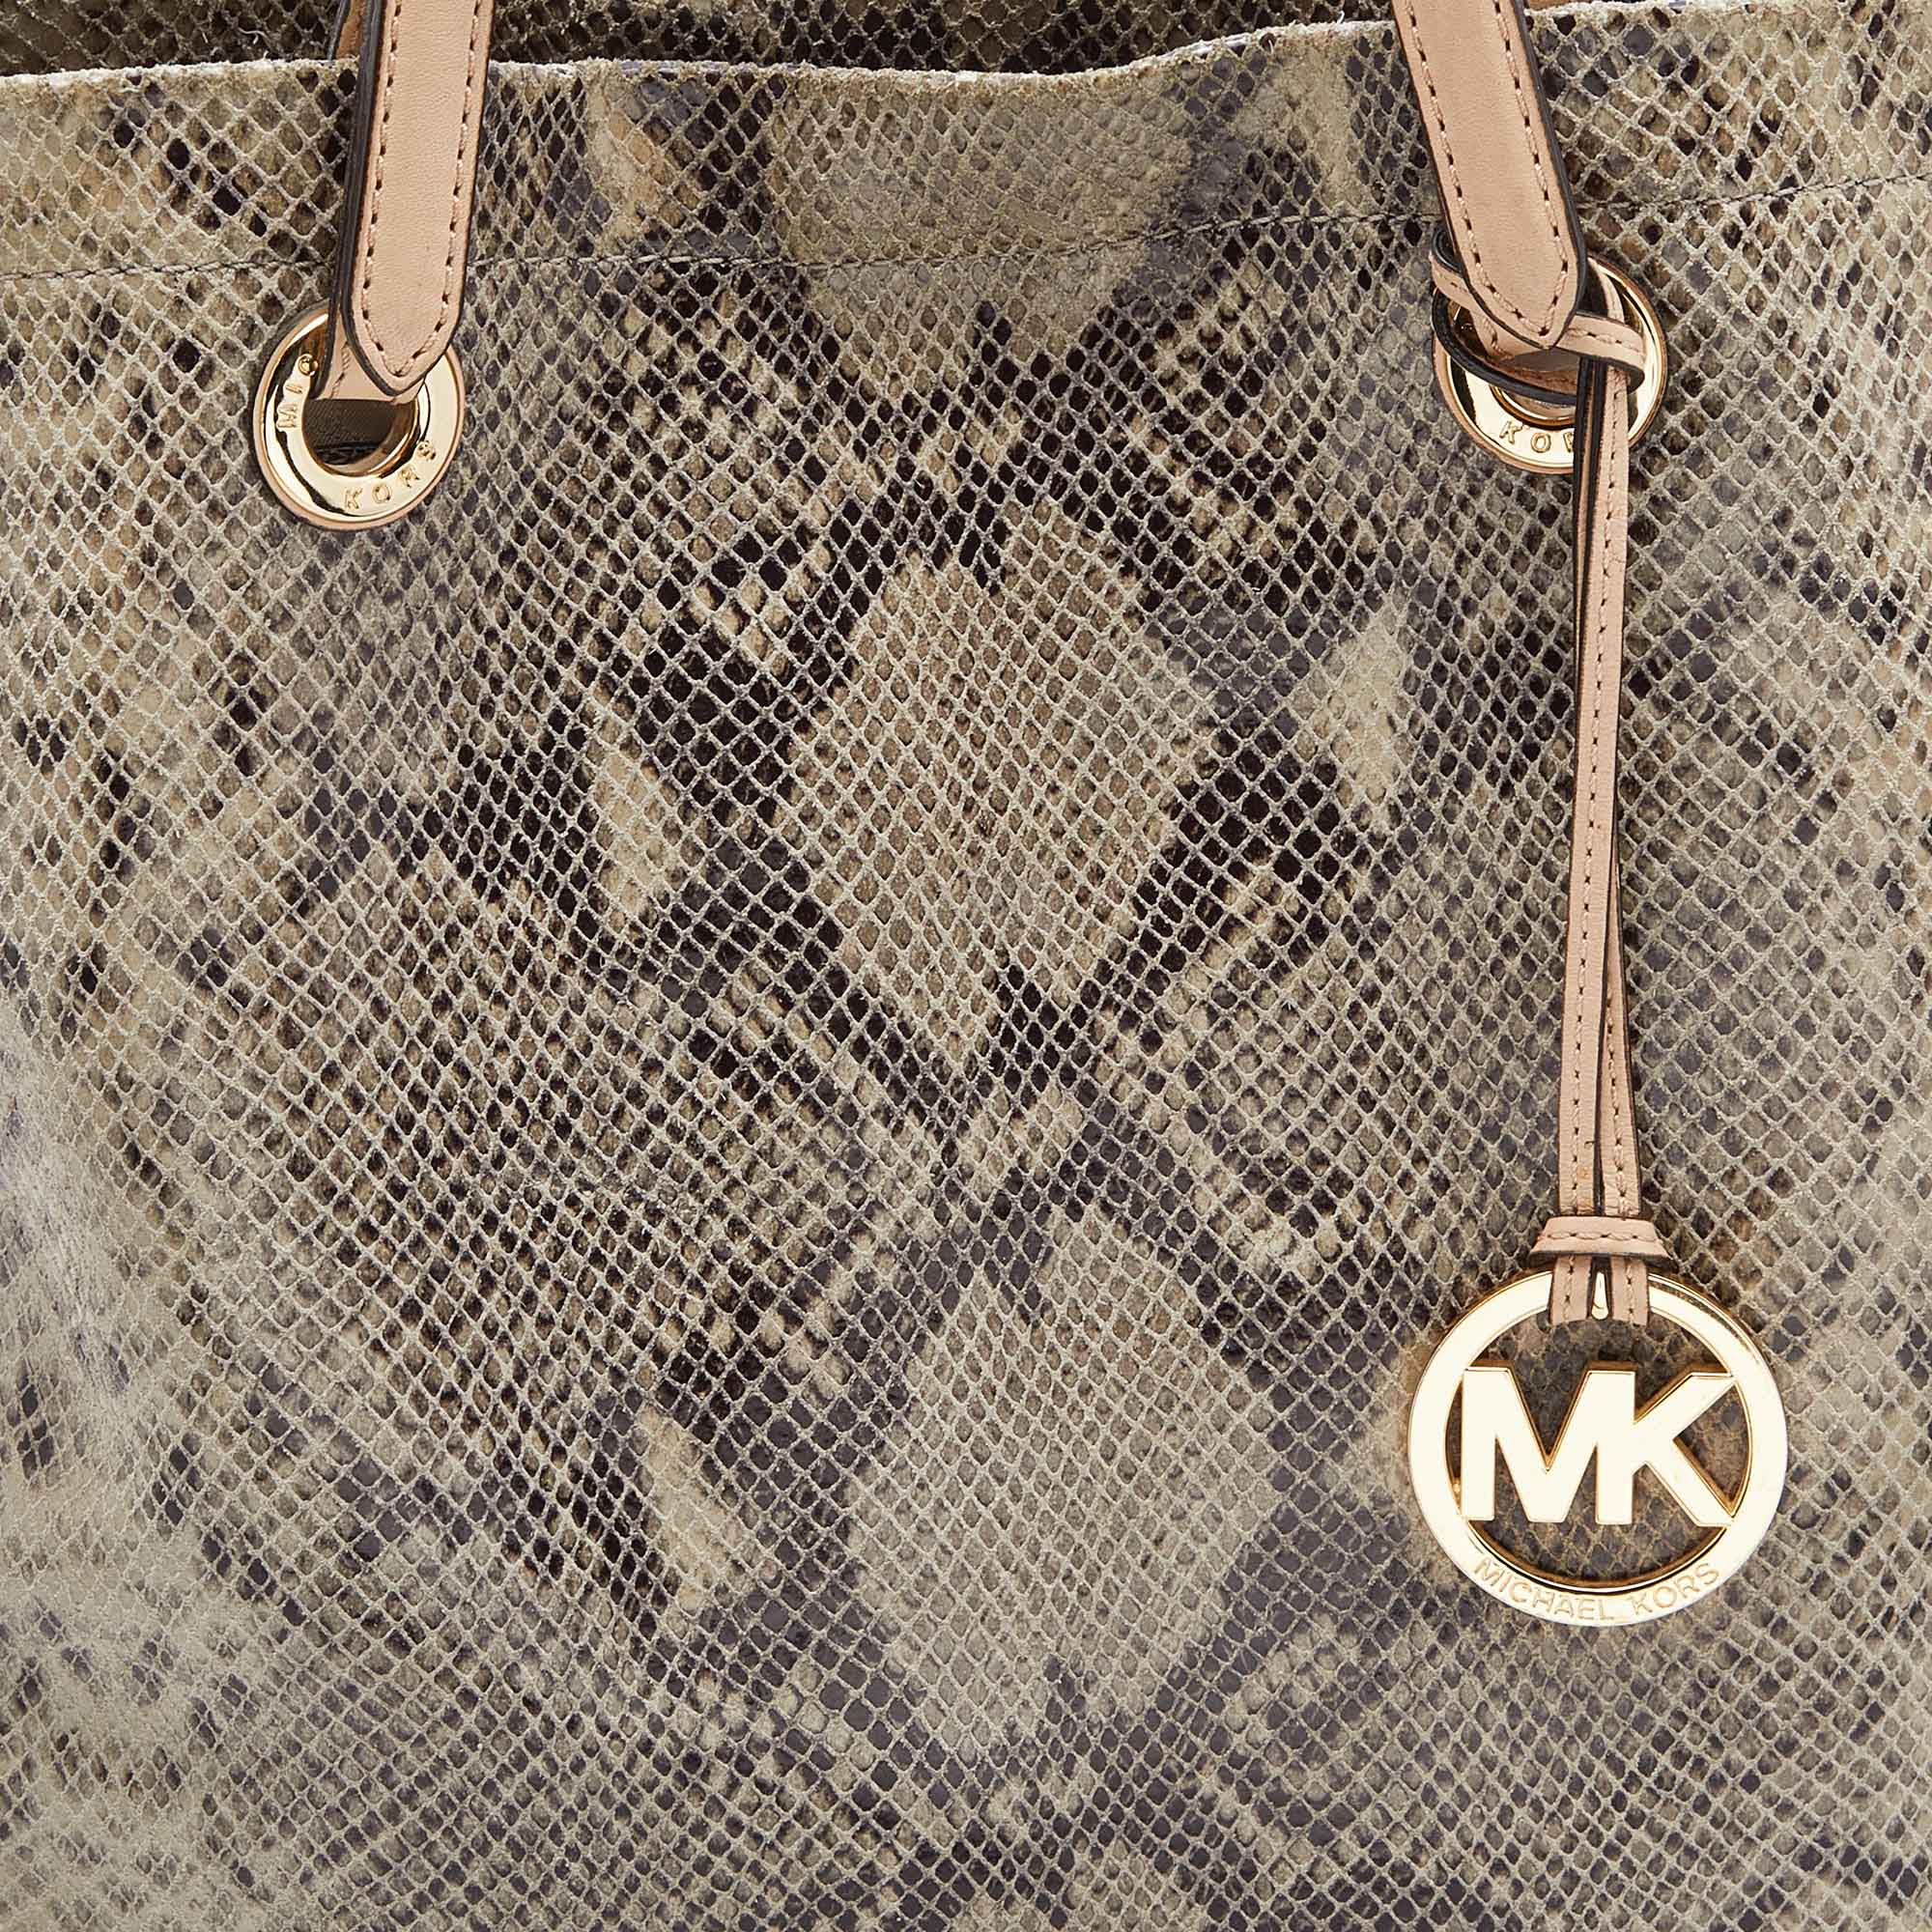 Michael Michael Kors Beige/Grey Python Effect Leather North South Tote